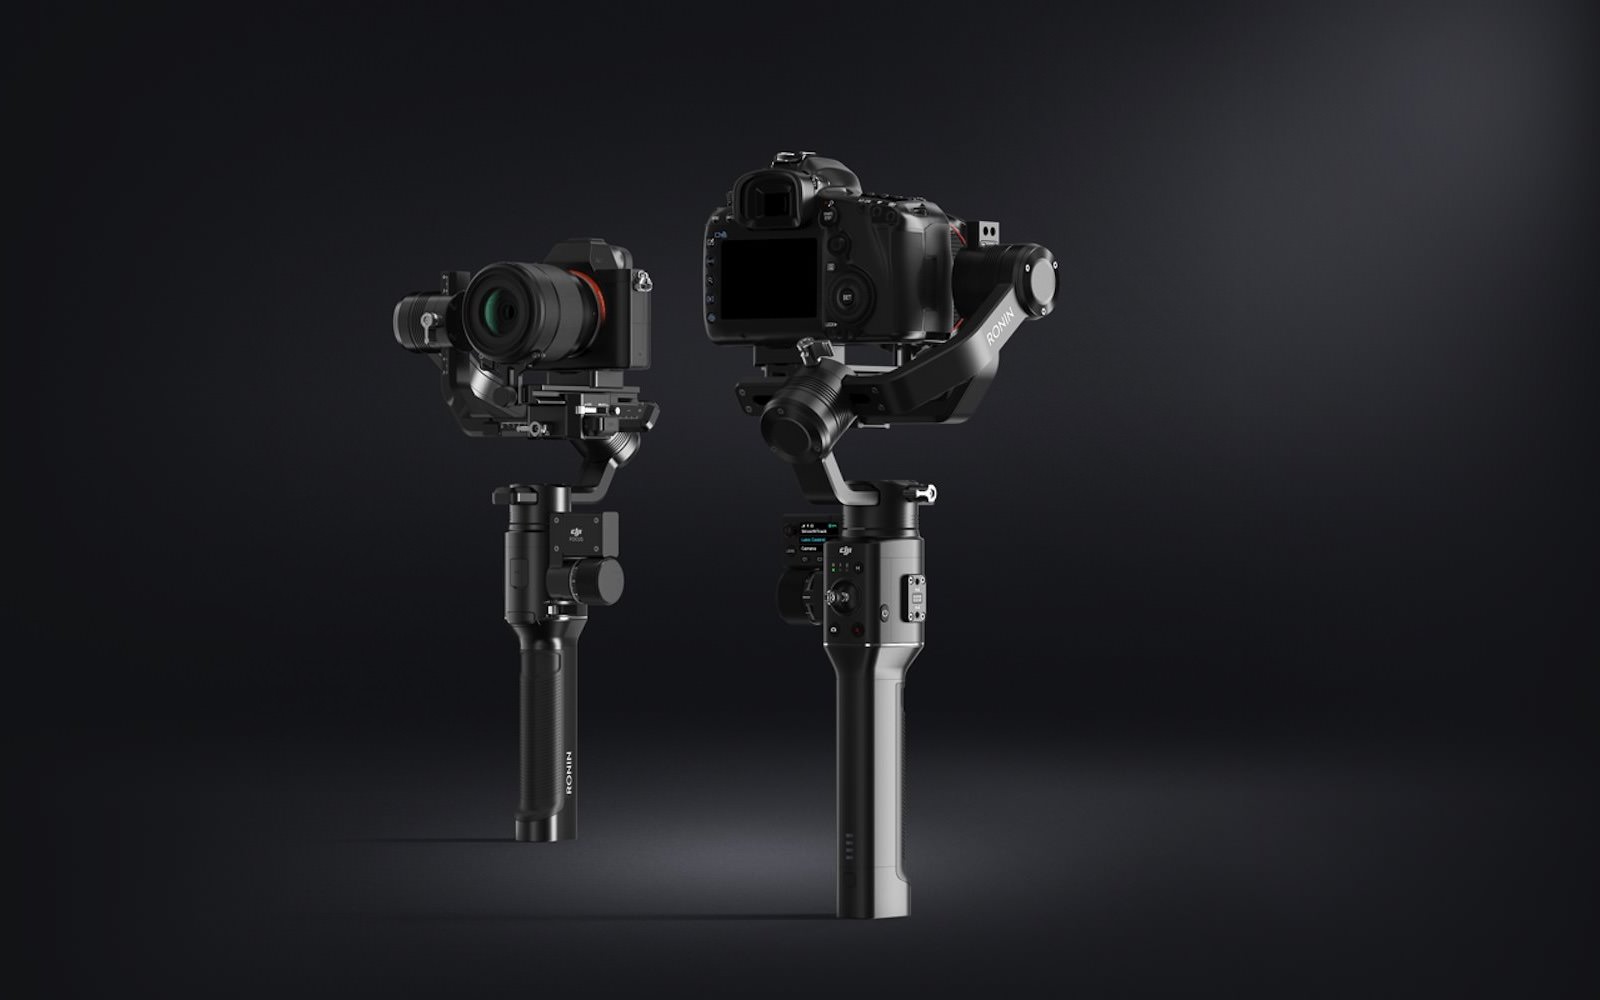 All-new DJI Ronin-S will be a game changer if DJI prices it right